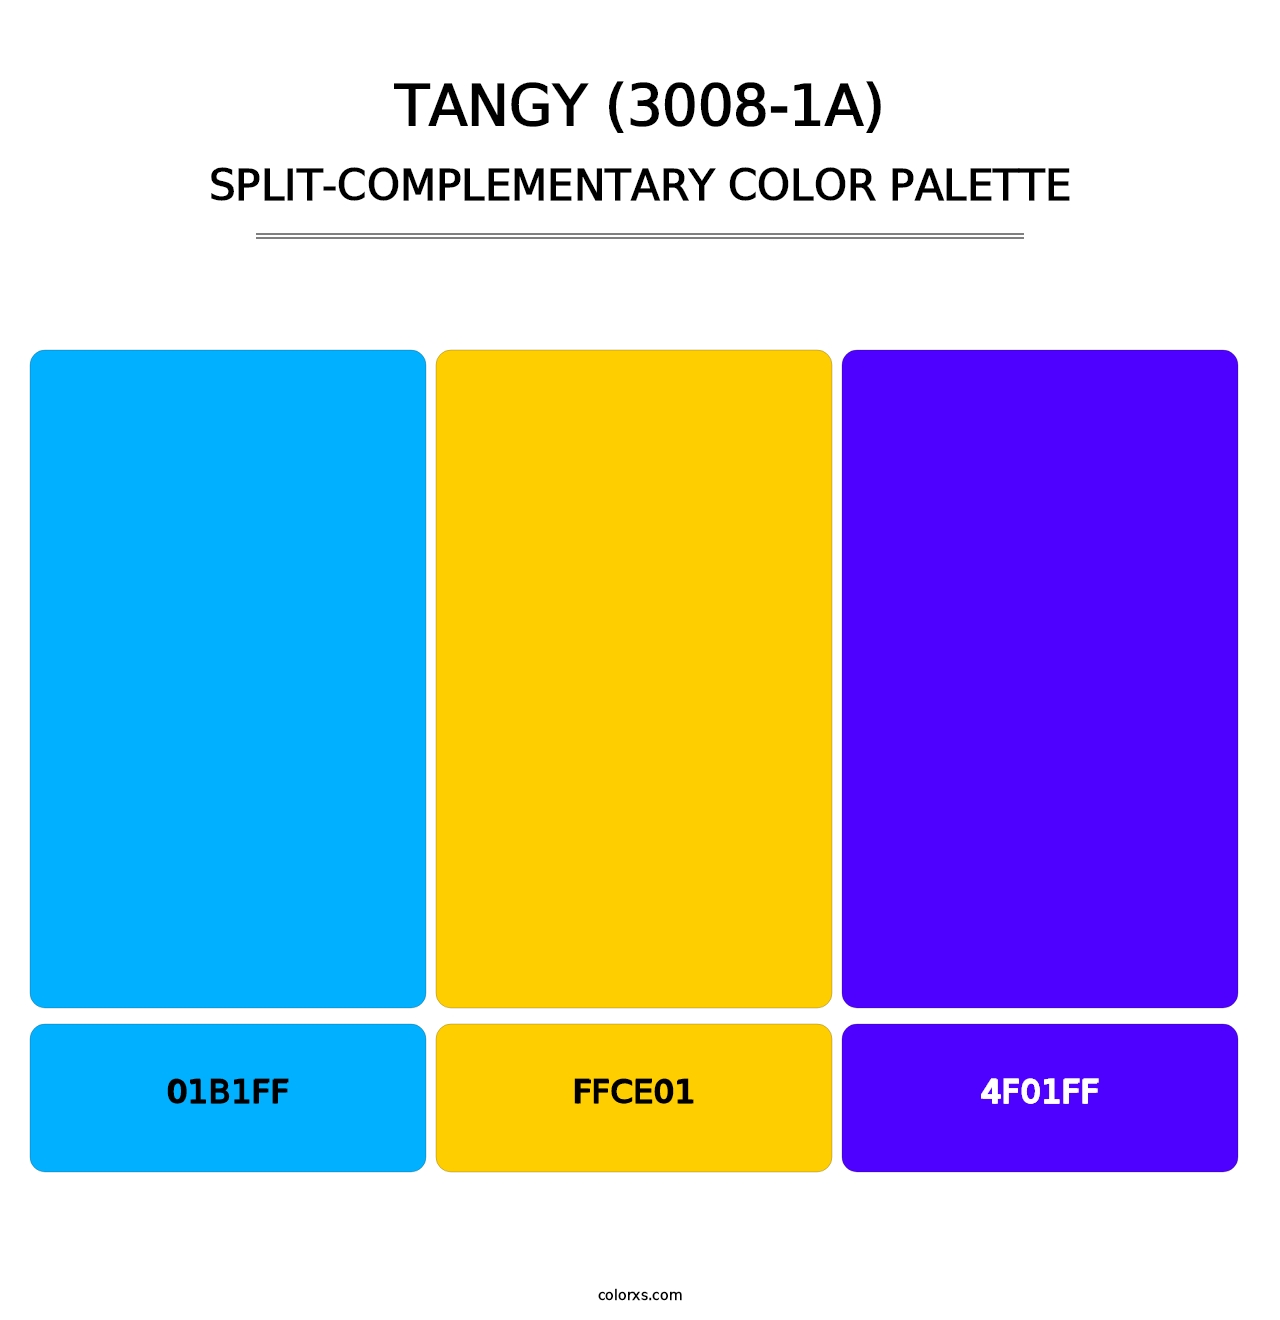 Tangy (3008-1A) - Split-Complementary Color Palette